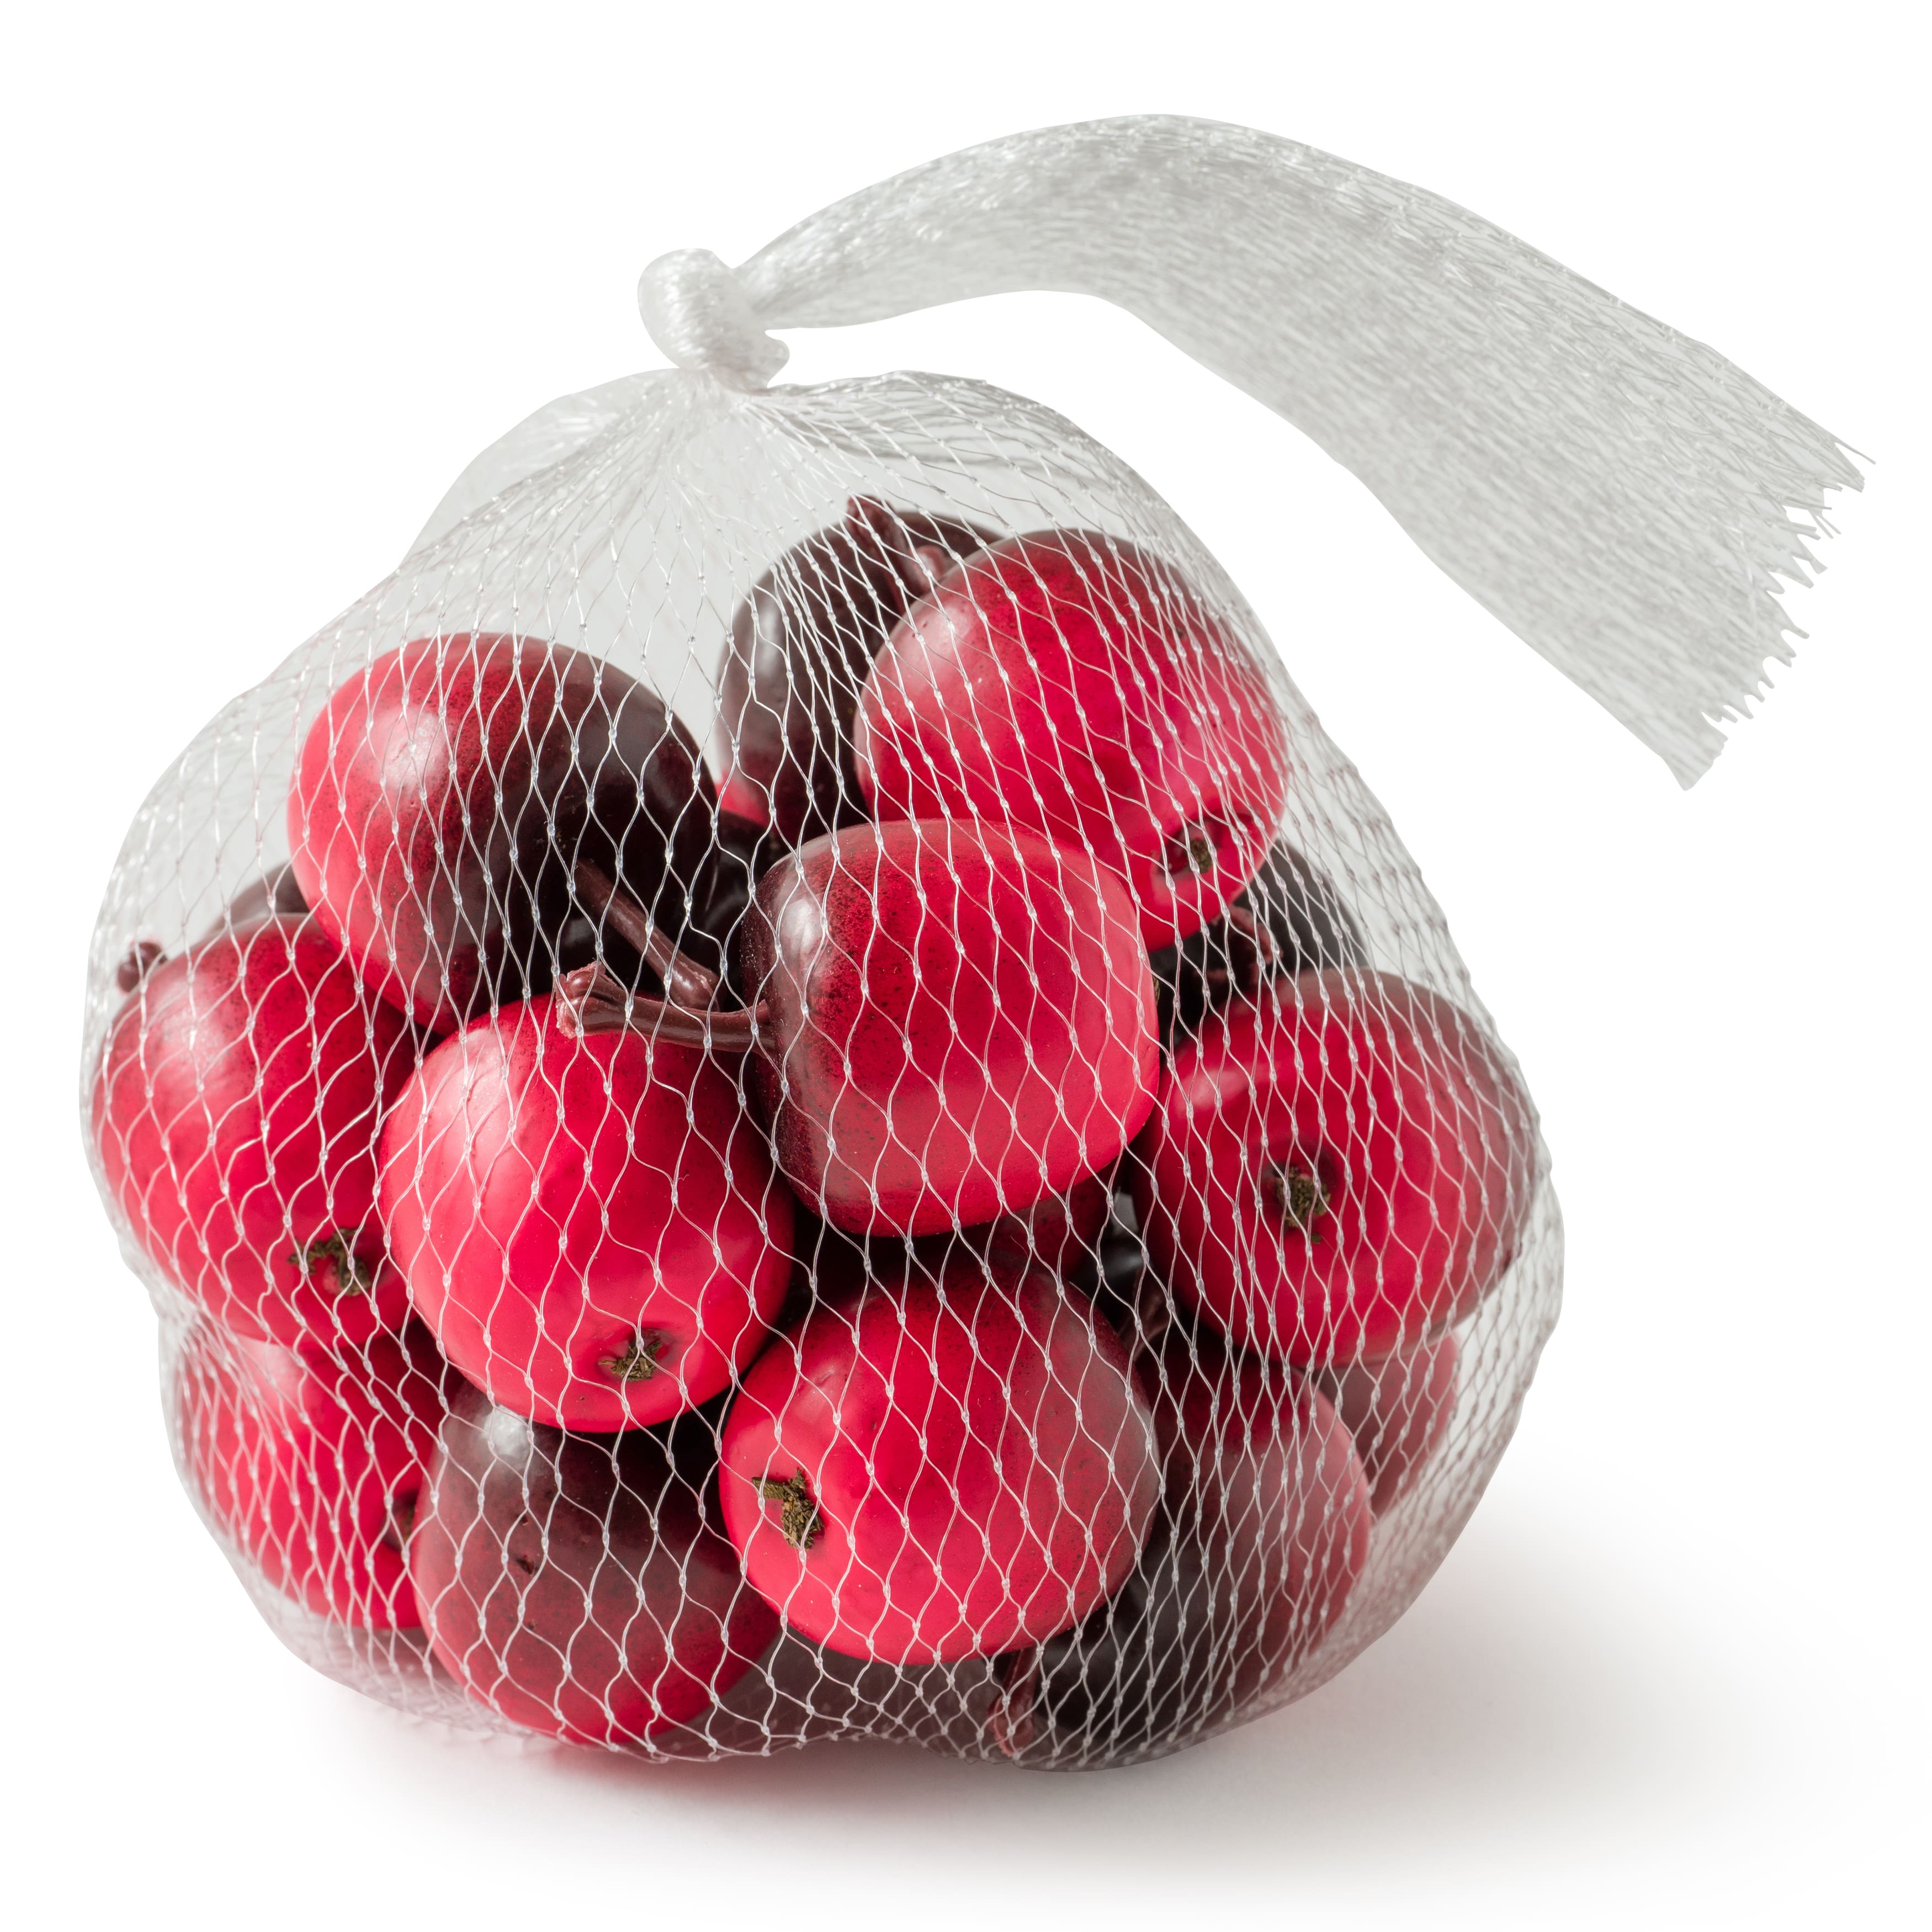 8 Packs: 20 ct. (160 total) Artificial Red Apples by Ashland&#xAE;